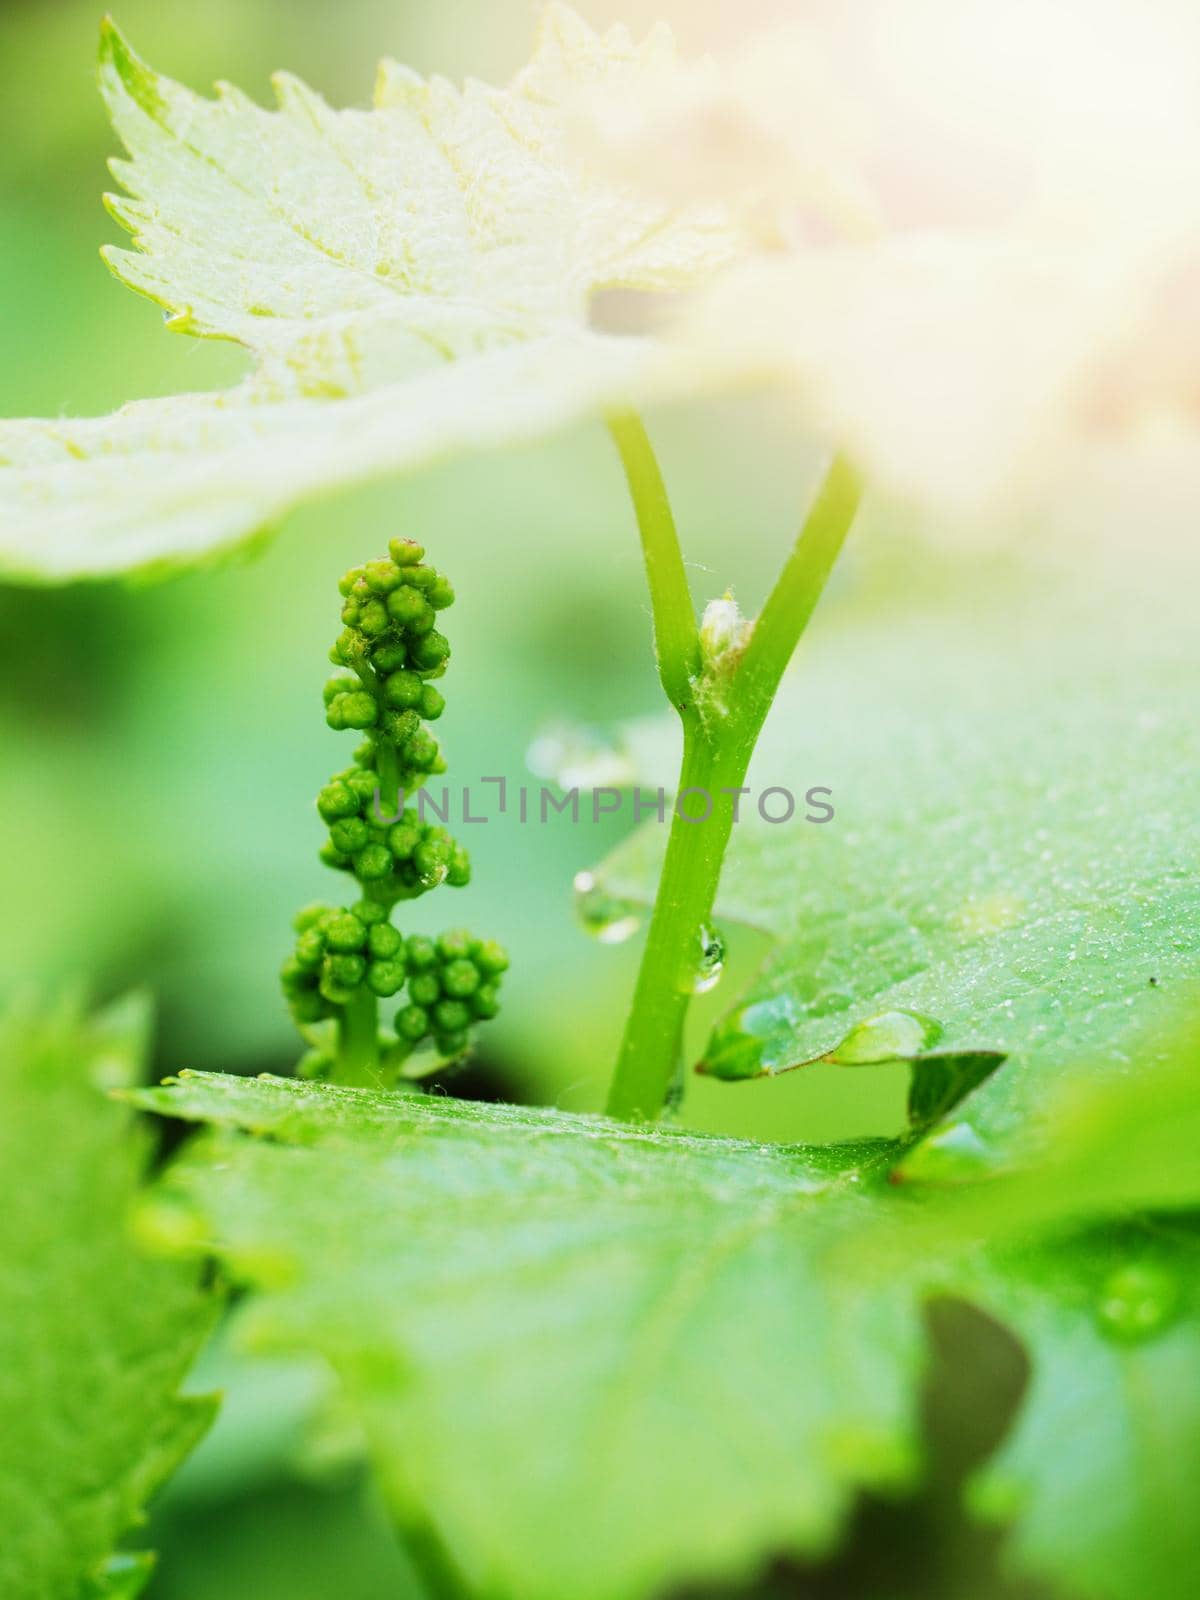 Bunch of green unripe white grapes in leaves growing. Selective focus, shallow DOF.